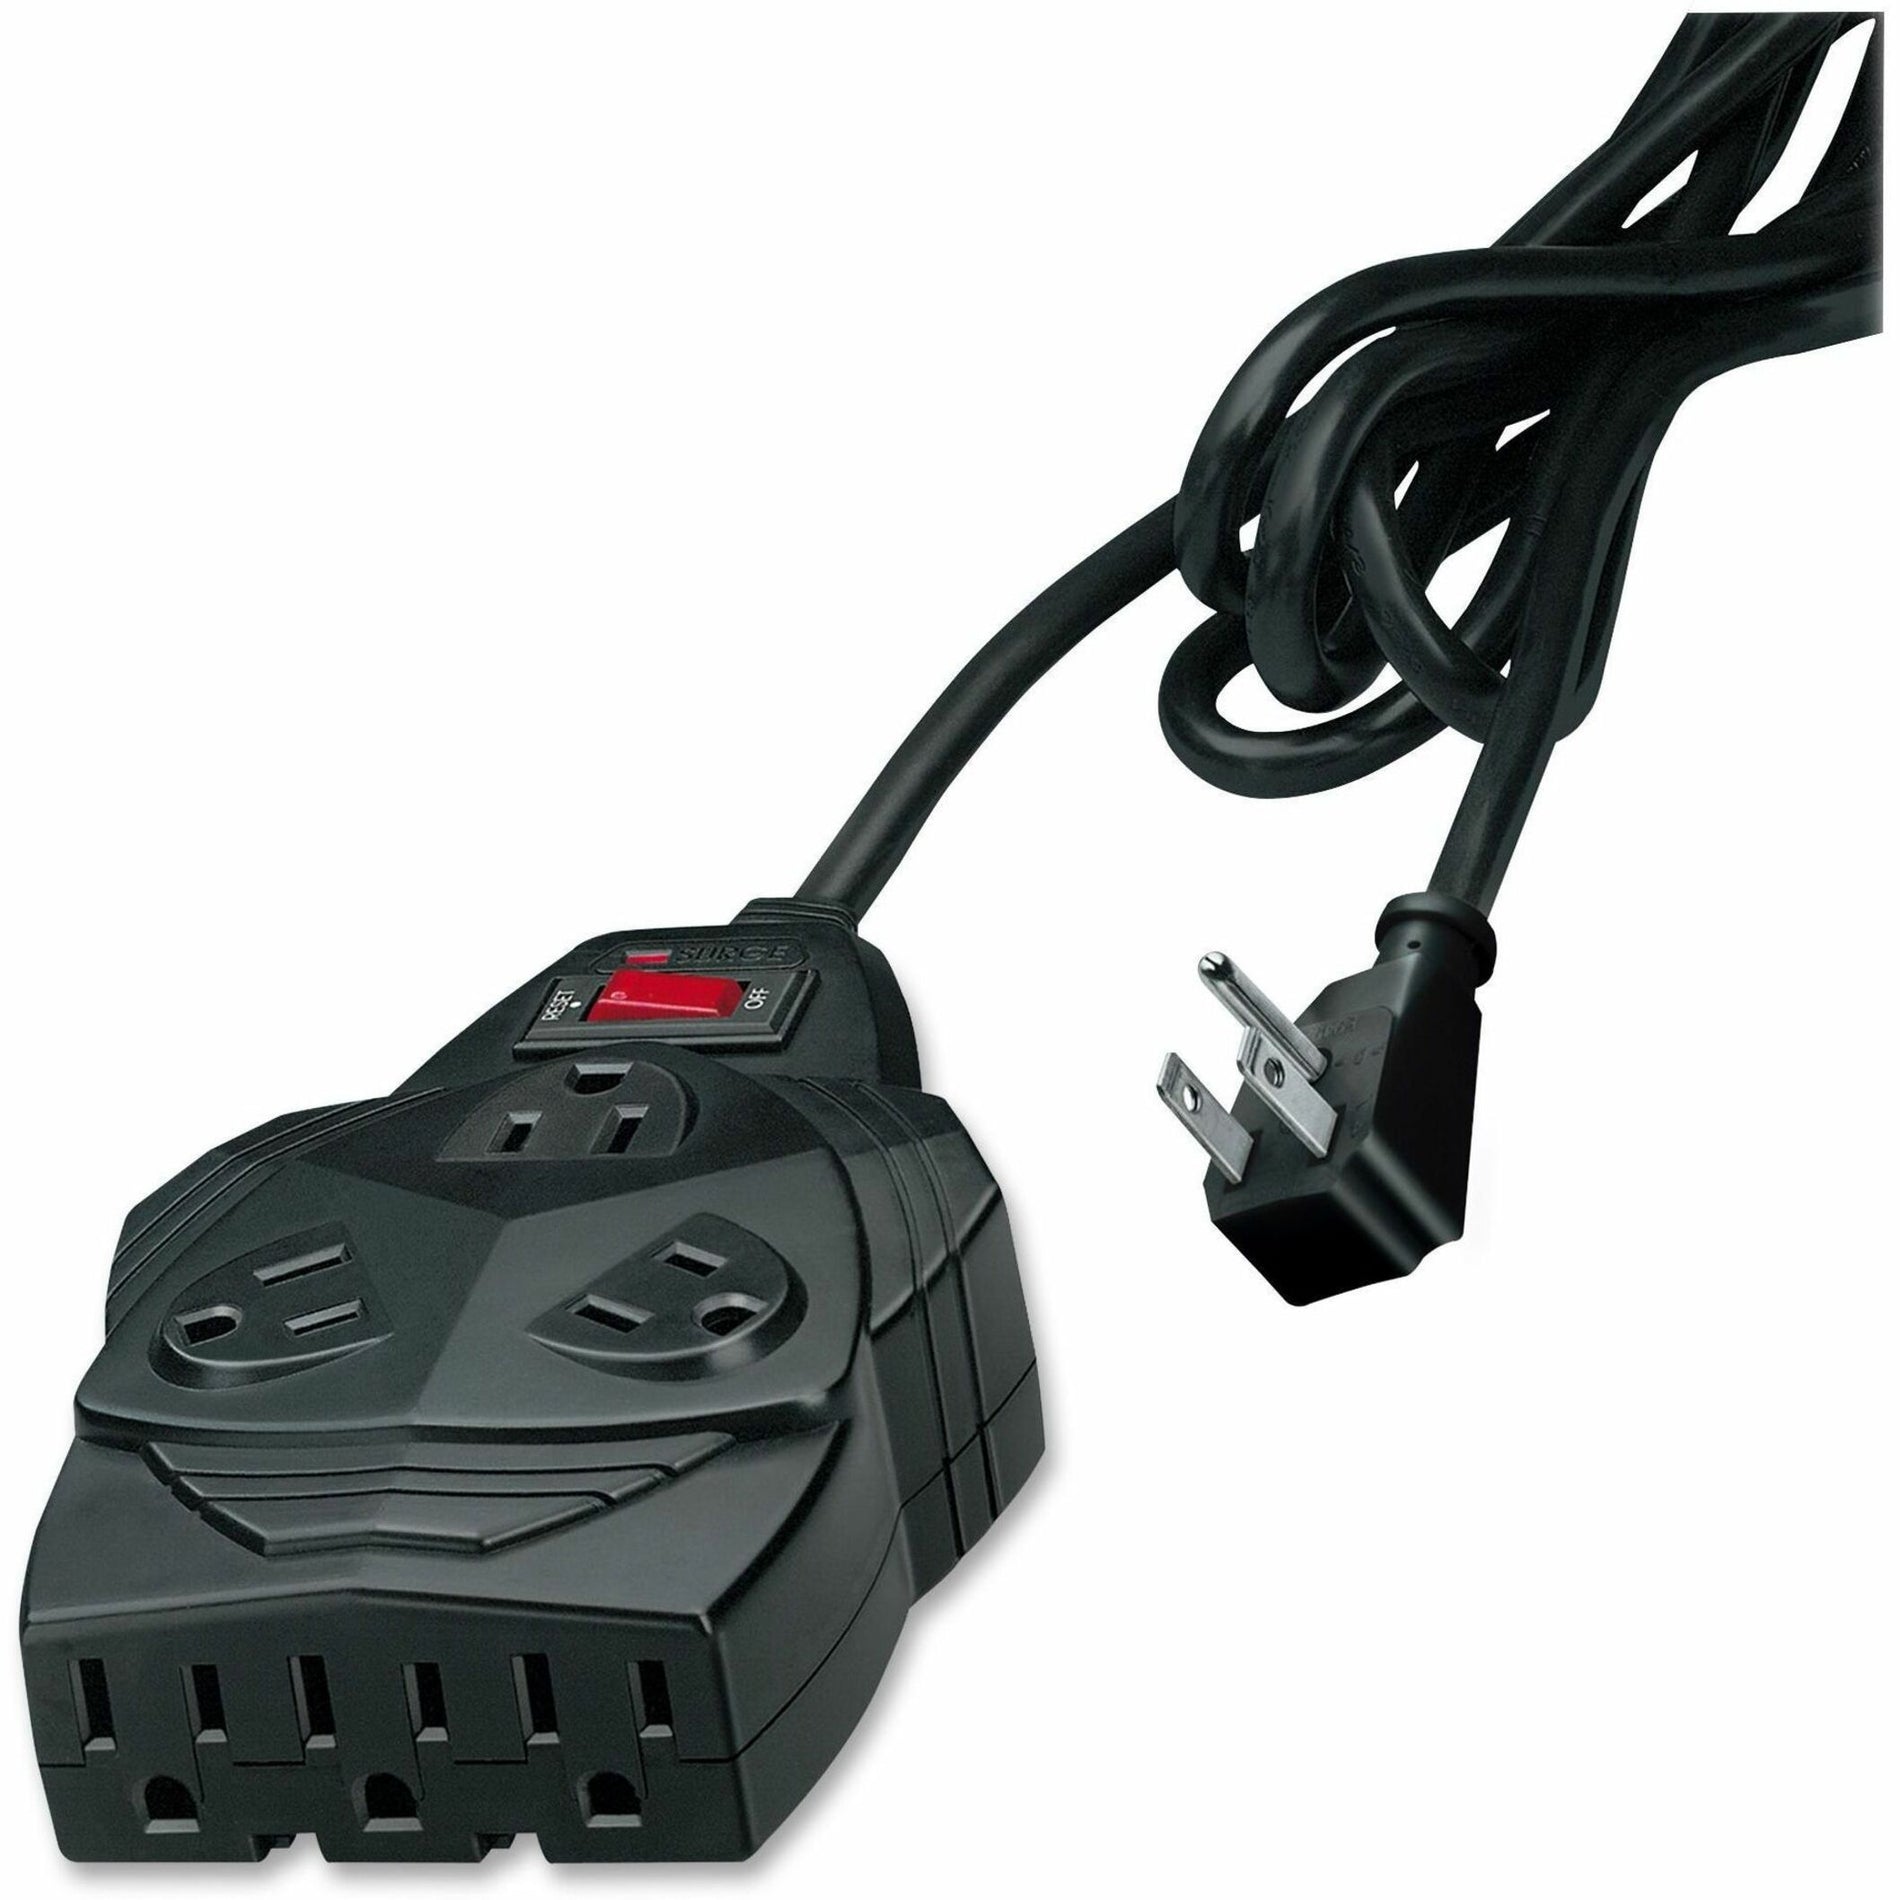 Fellowes 99090 Mighty 8 Surge Protector, 5 Year Limited Warranty, 1300 J Surge Energy Rating